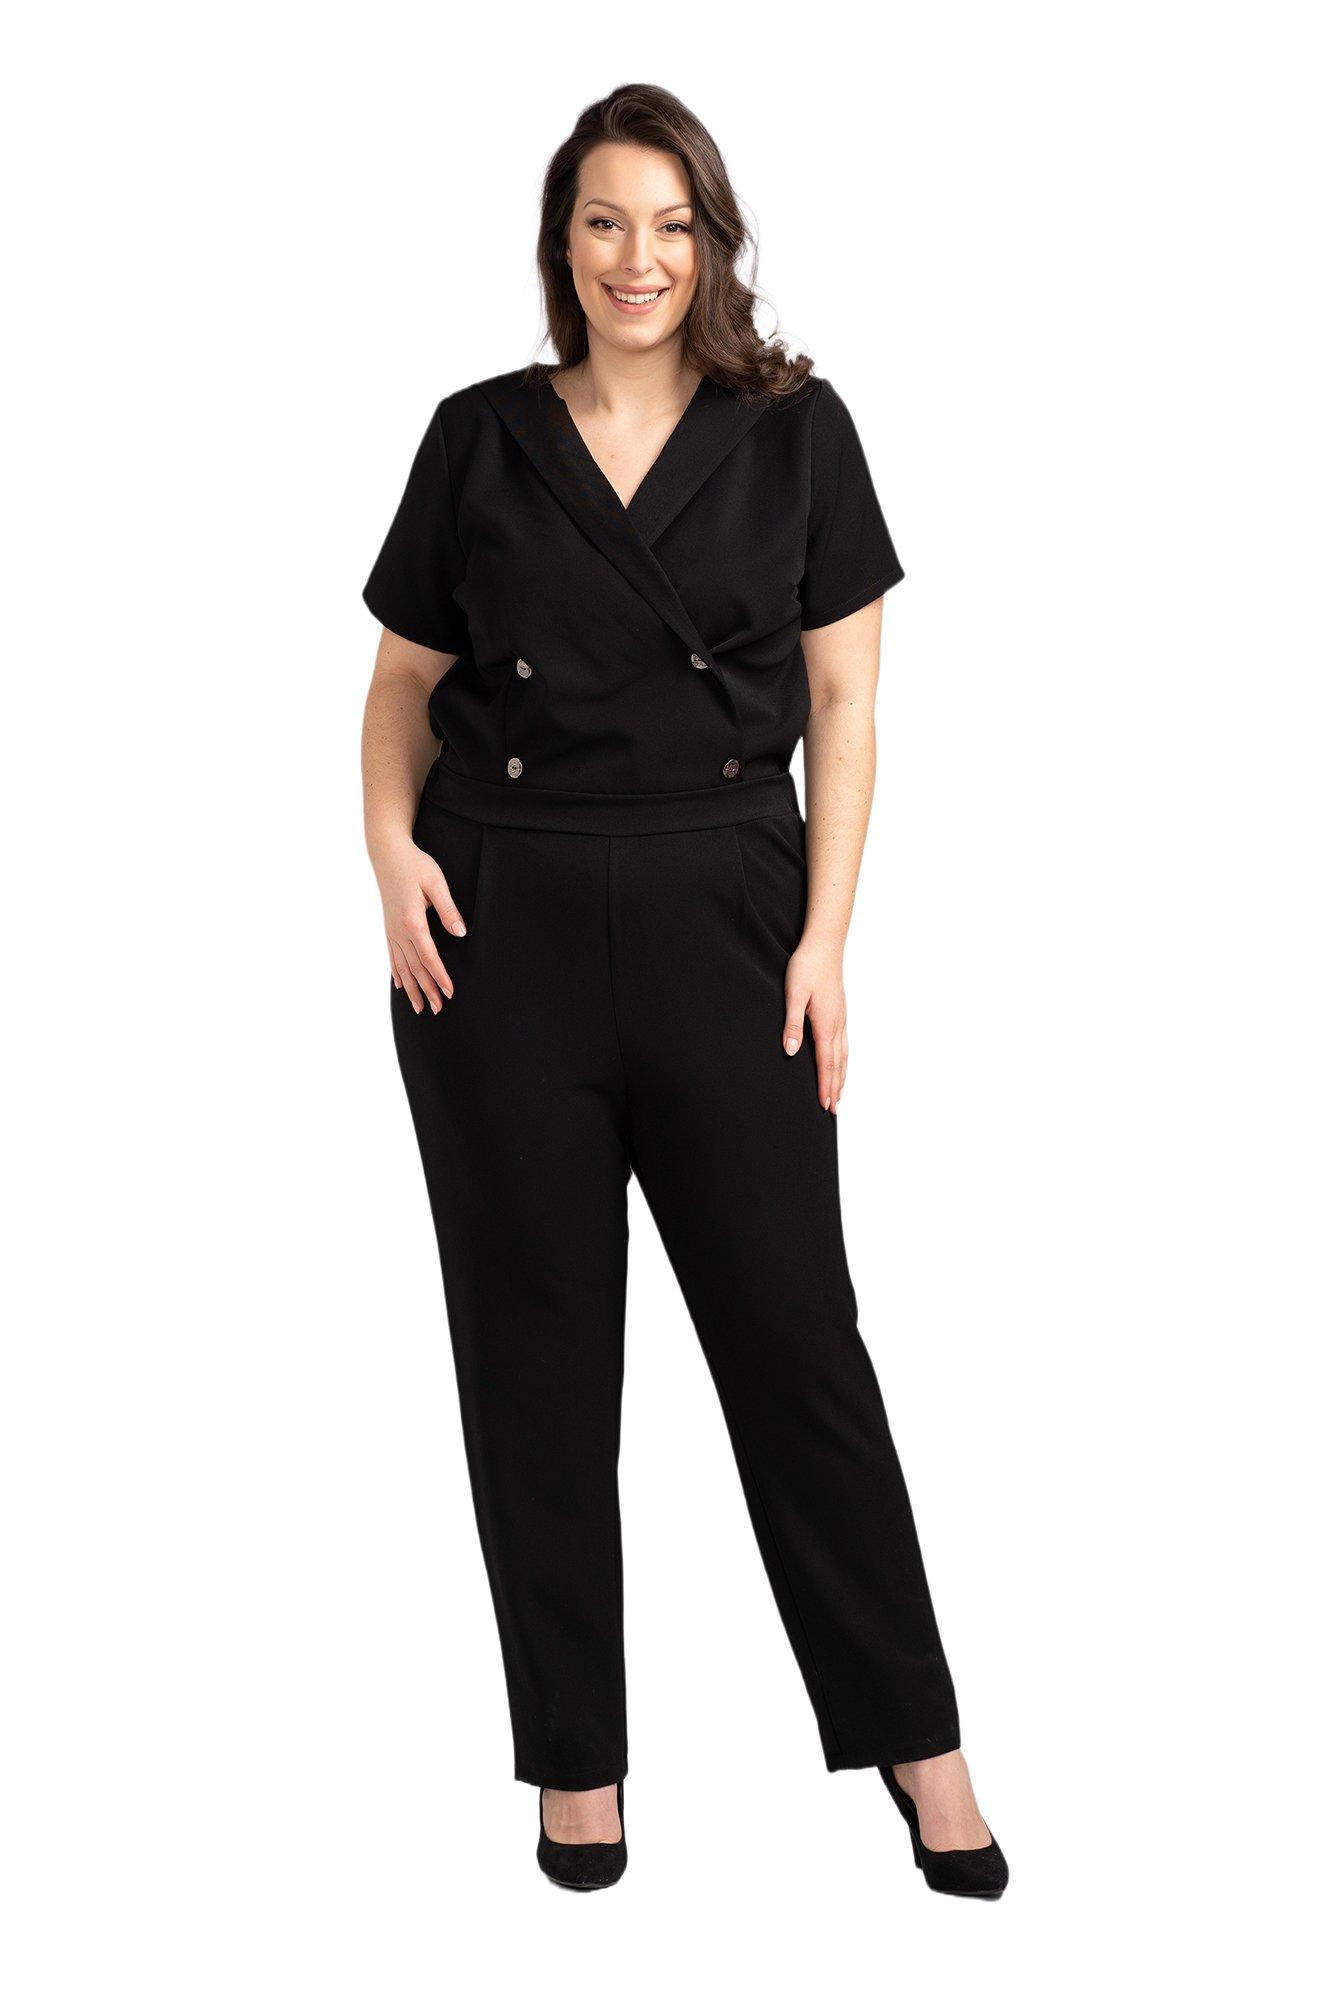 SELONE Plus Size Jumpsuits for Women Dressy V Neck With Pockets